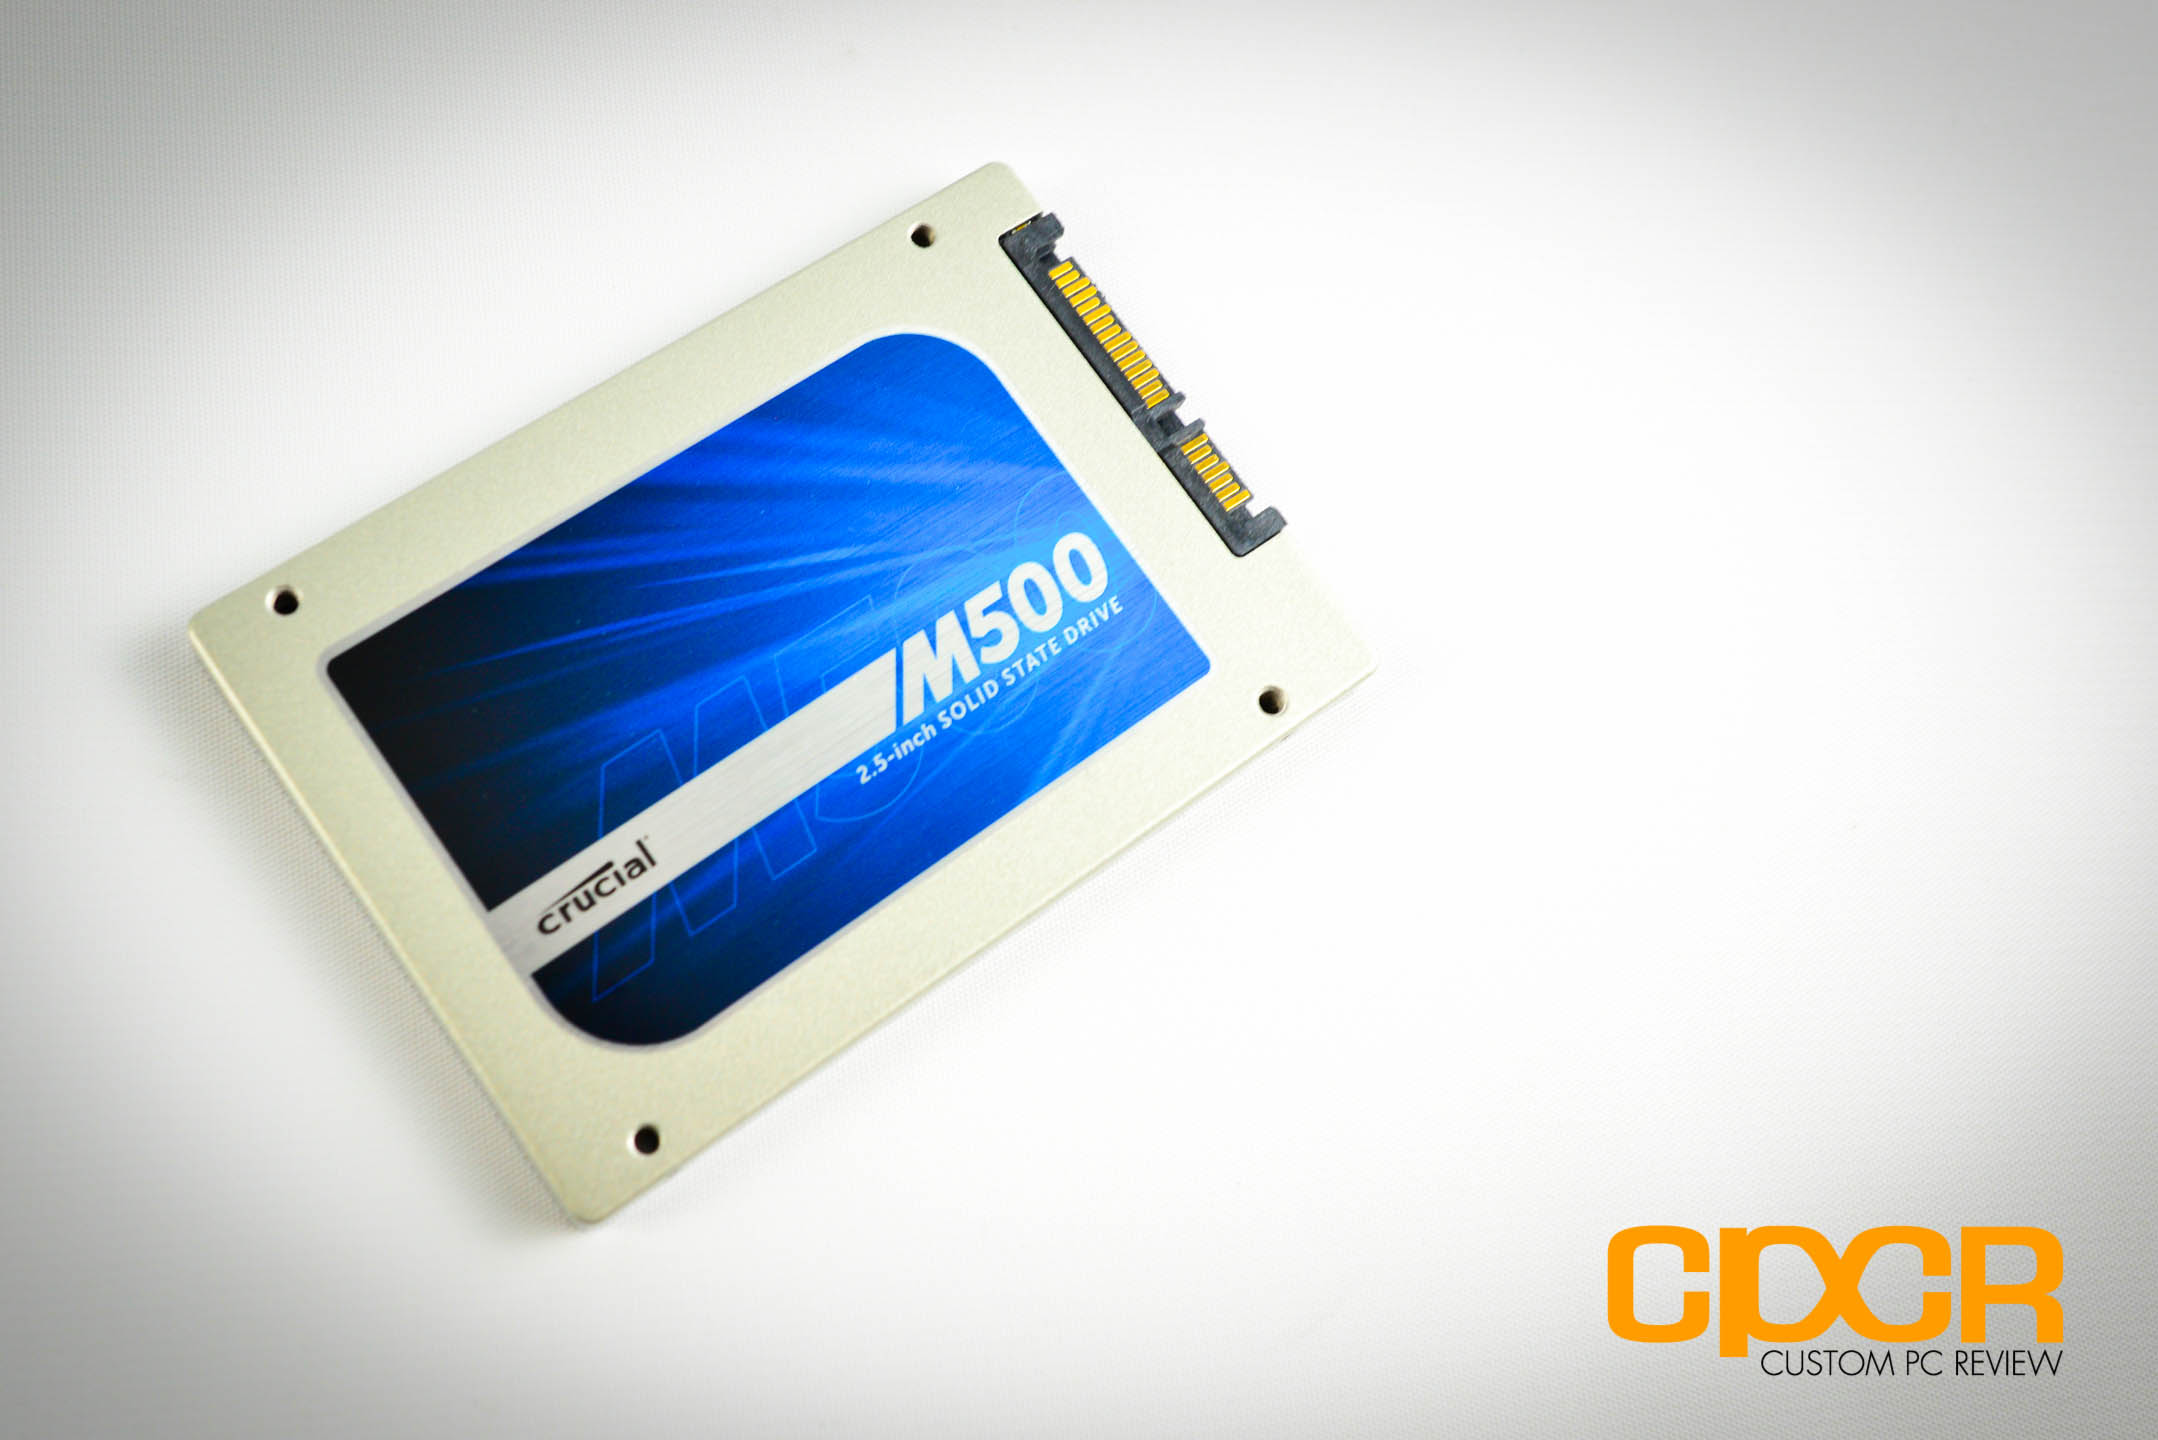 Review: Crucial M500 480GB SSD